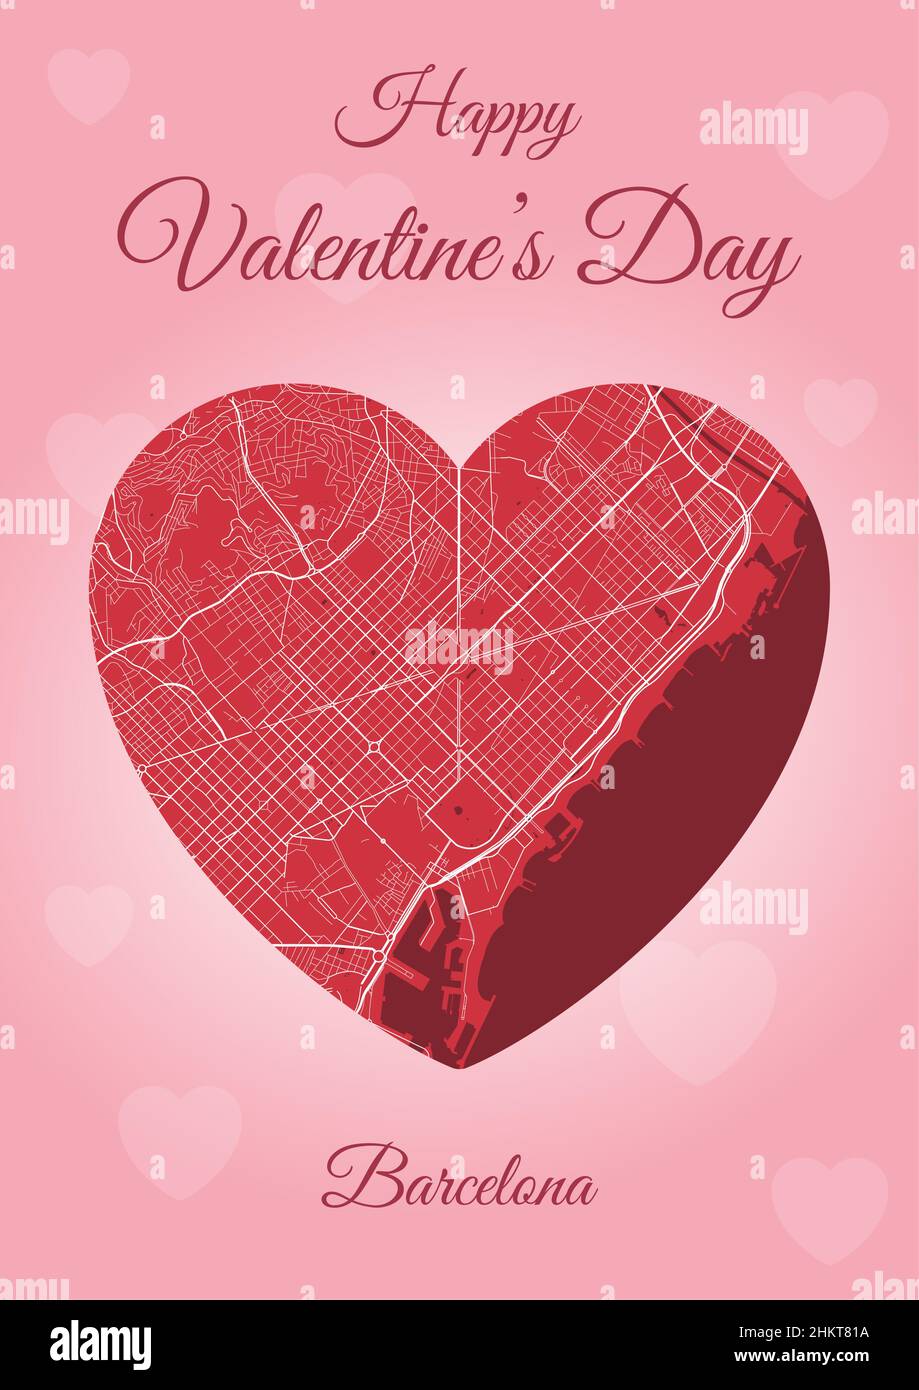 Happy Valentine's day holiday card with Barcelona map in heart shape. Vertical A4 Pink and red color vector illustration. Love city travel cityscape. Stock Vector